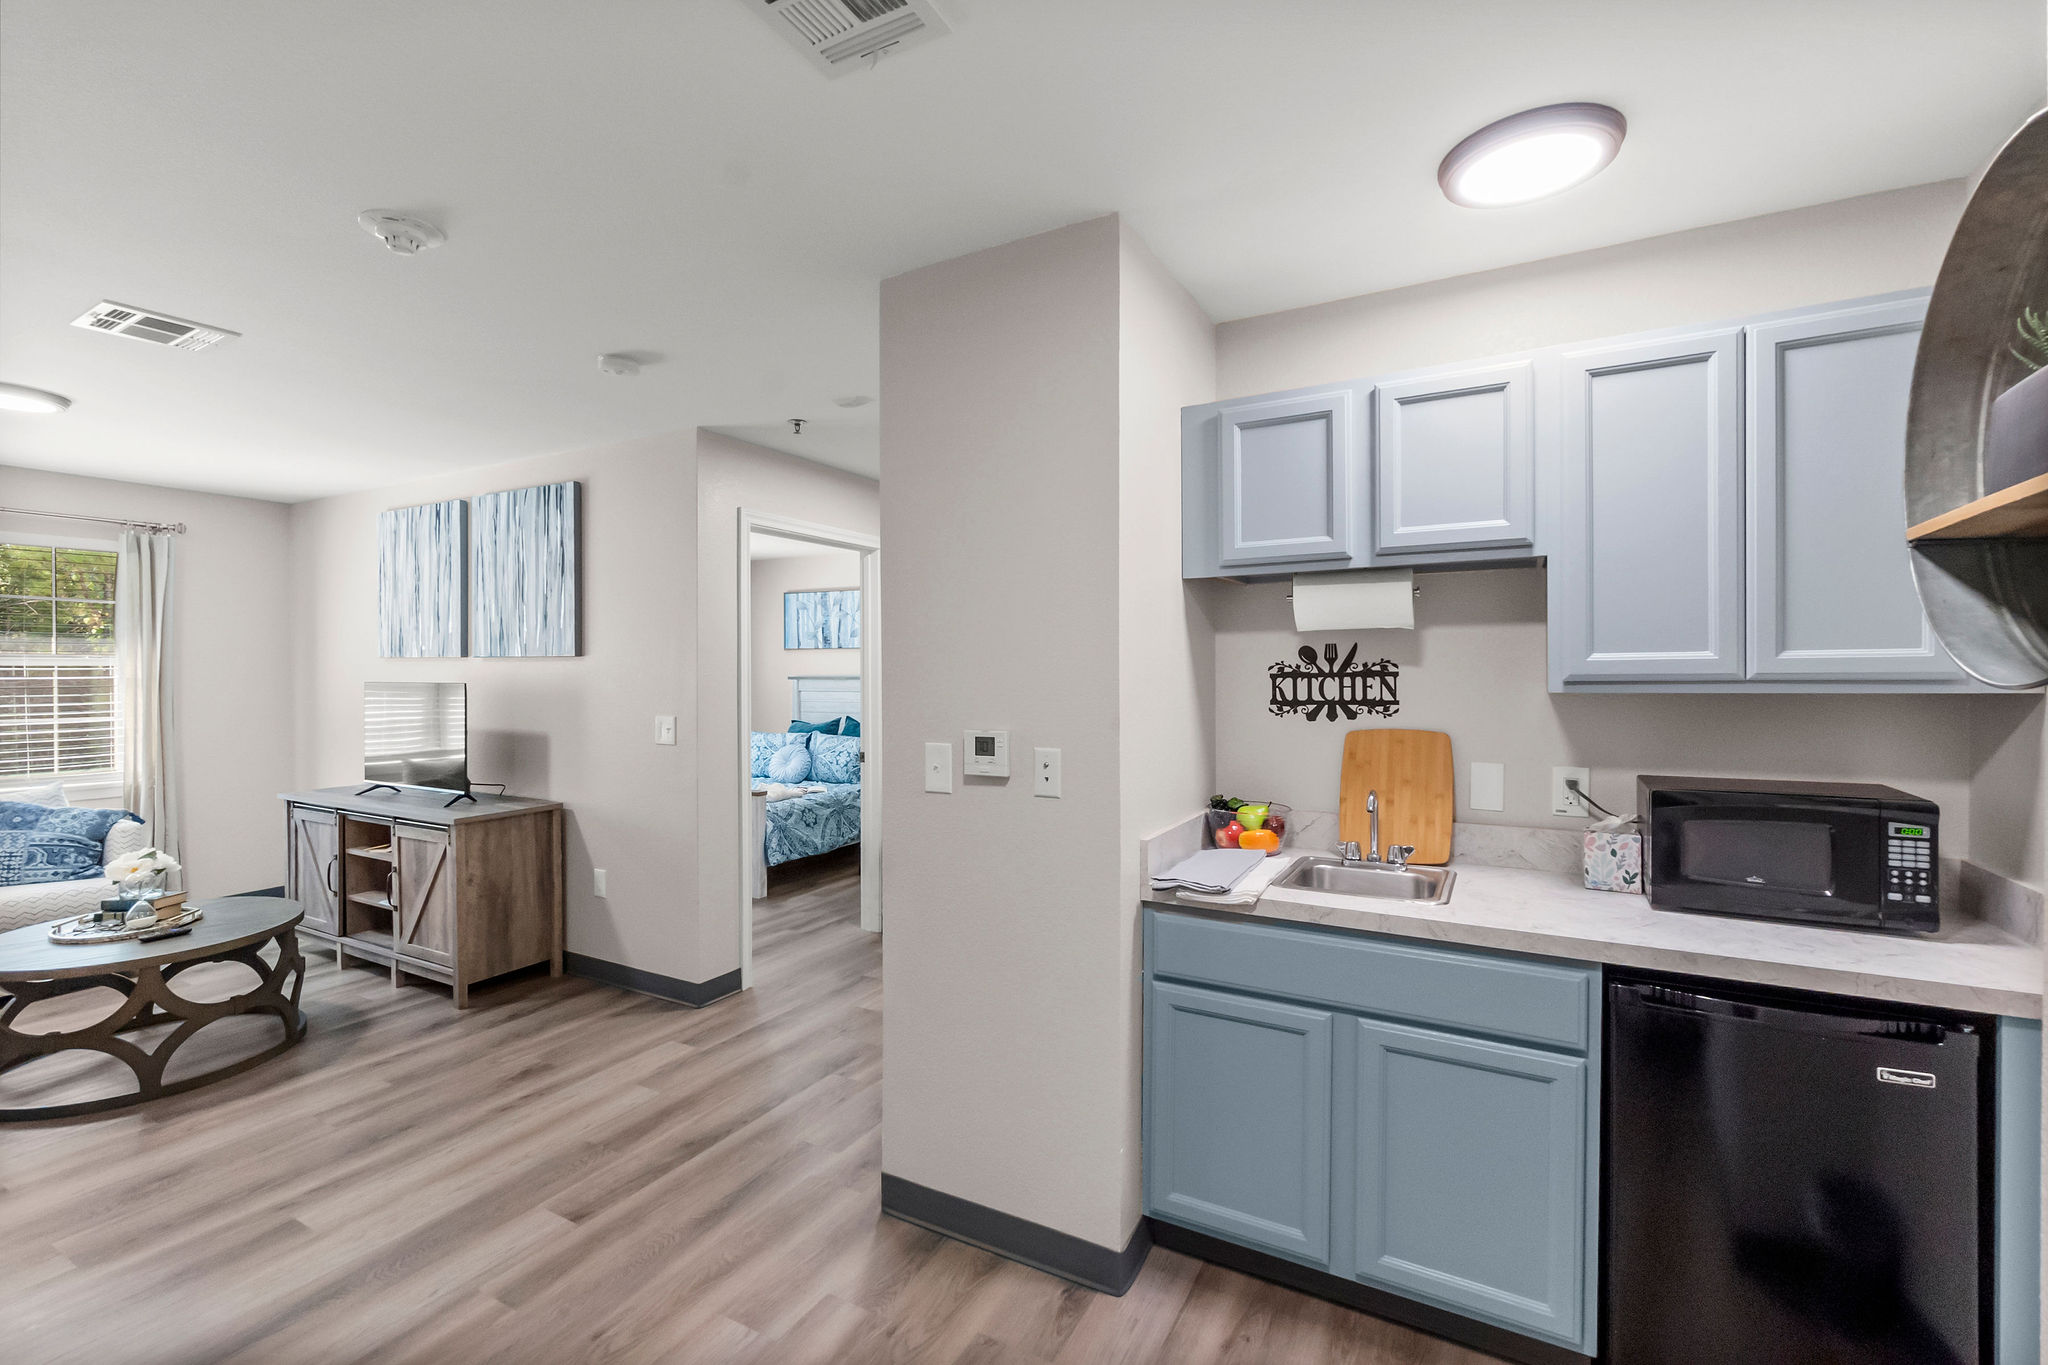 An apartment living area and kitchen at Sundale Senior Living in Huntsville, TX